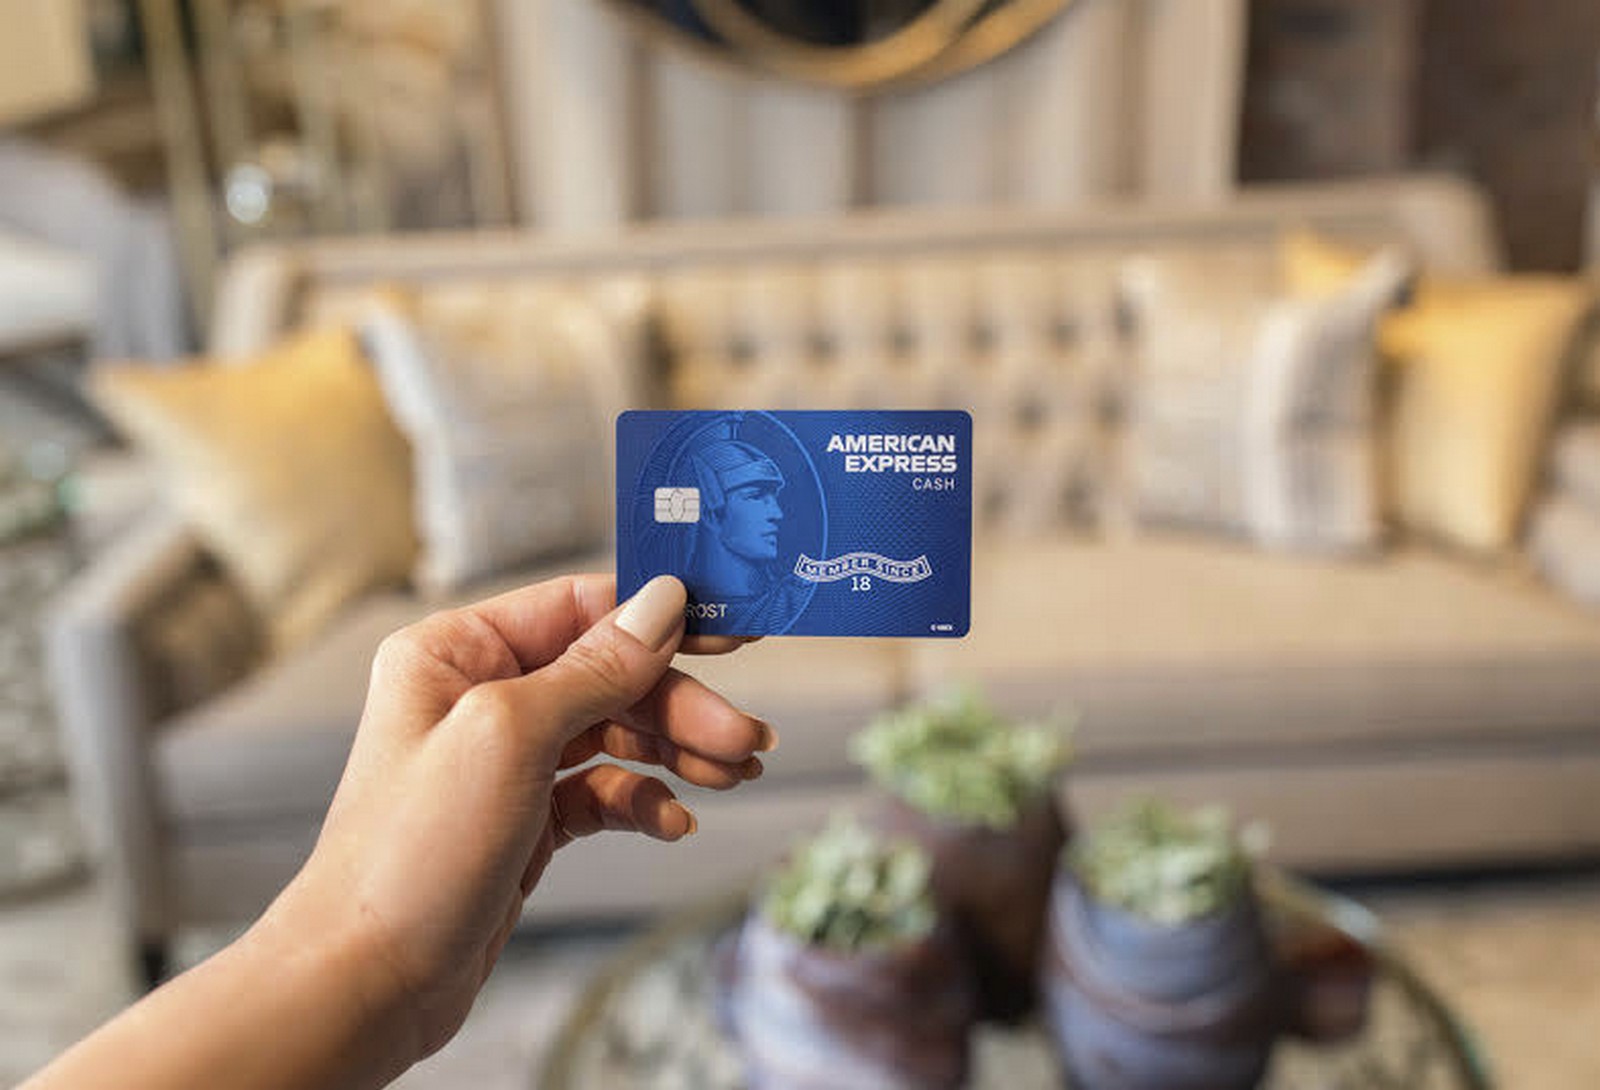 The American Express Cash Credit Card Review